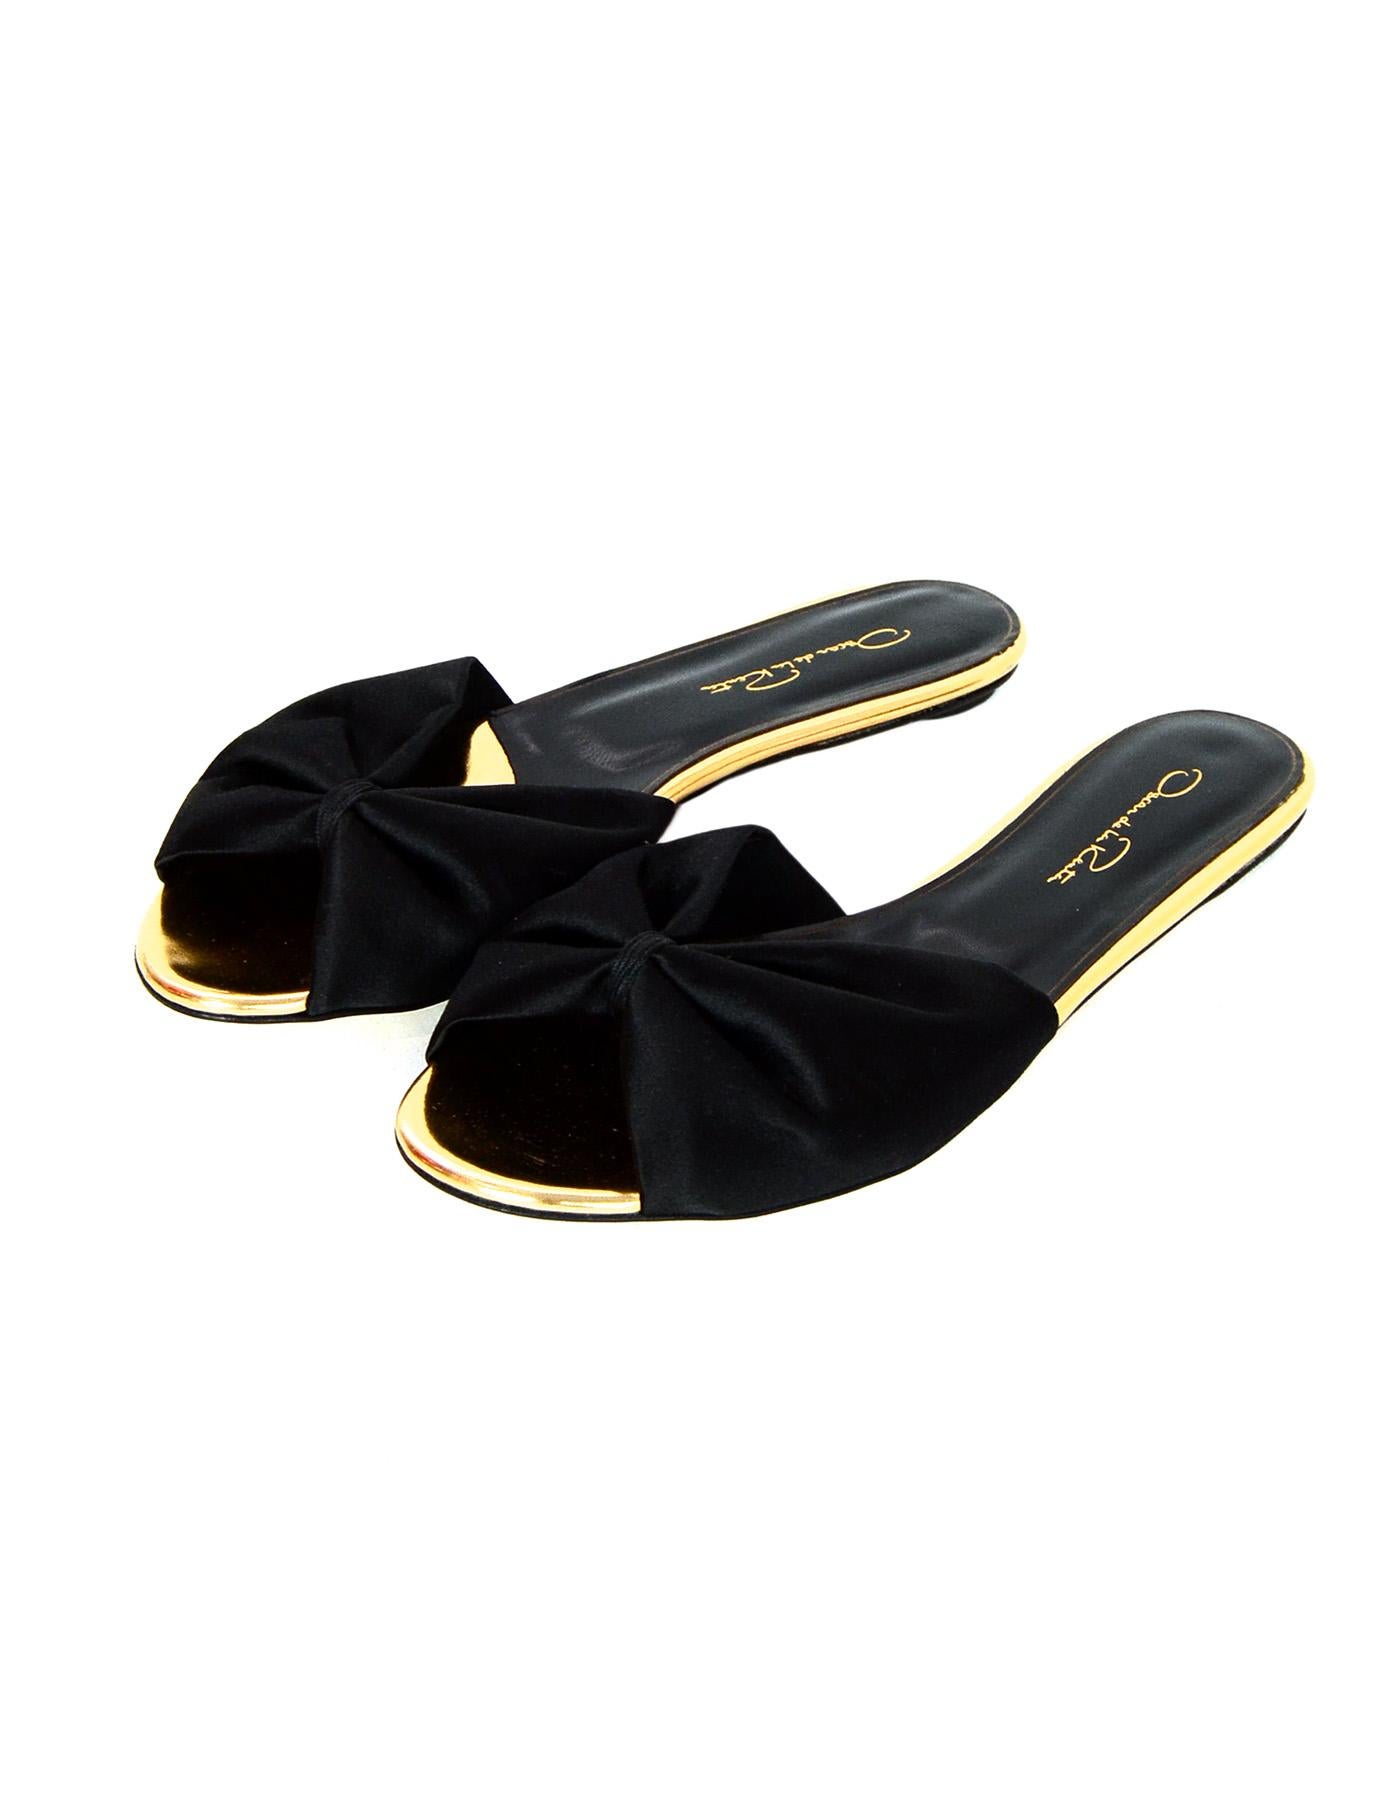 Oscar De La Renta Black Satin Bow & Specchio Mia Slides Sz 39

Made In: Italy
Color: Black and gold
Materials: Satin and specchio
Closure/Opening: Slide on
Overall Condition: Excellent pre-owned condition 
Estimated Retail: $590 + tax

Measurements: